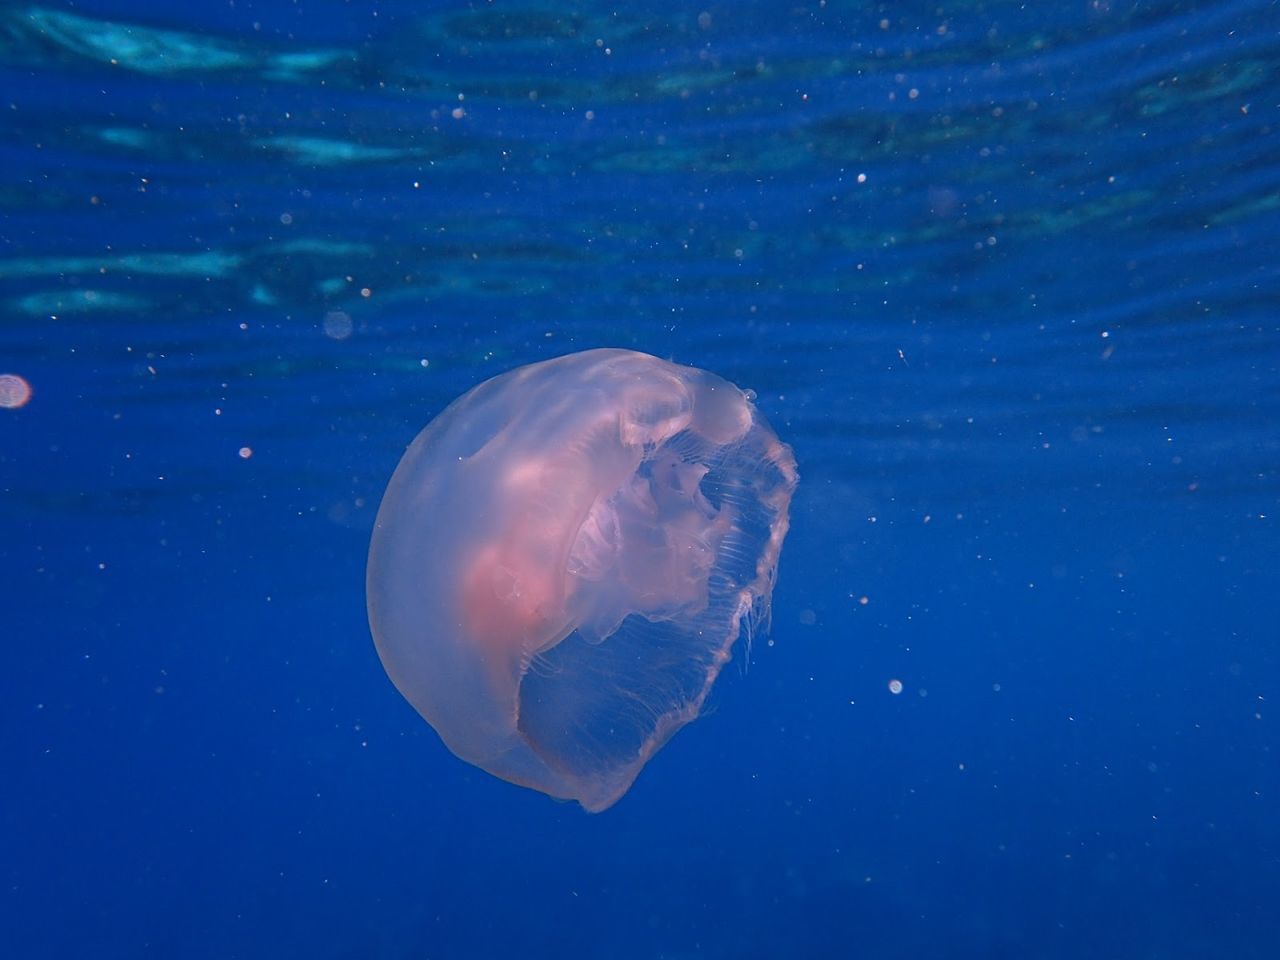 CLOSE-UP OF JELLYFISH IN WATER